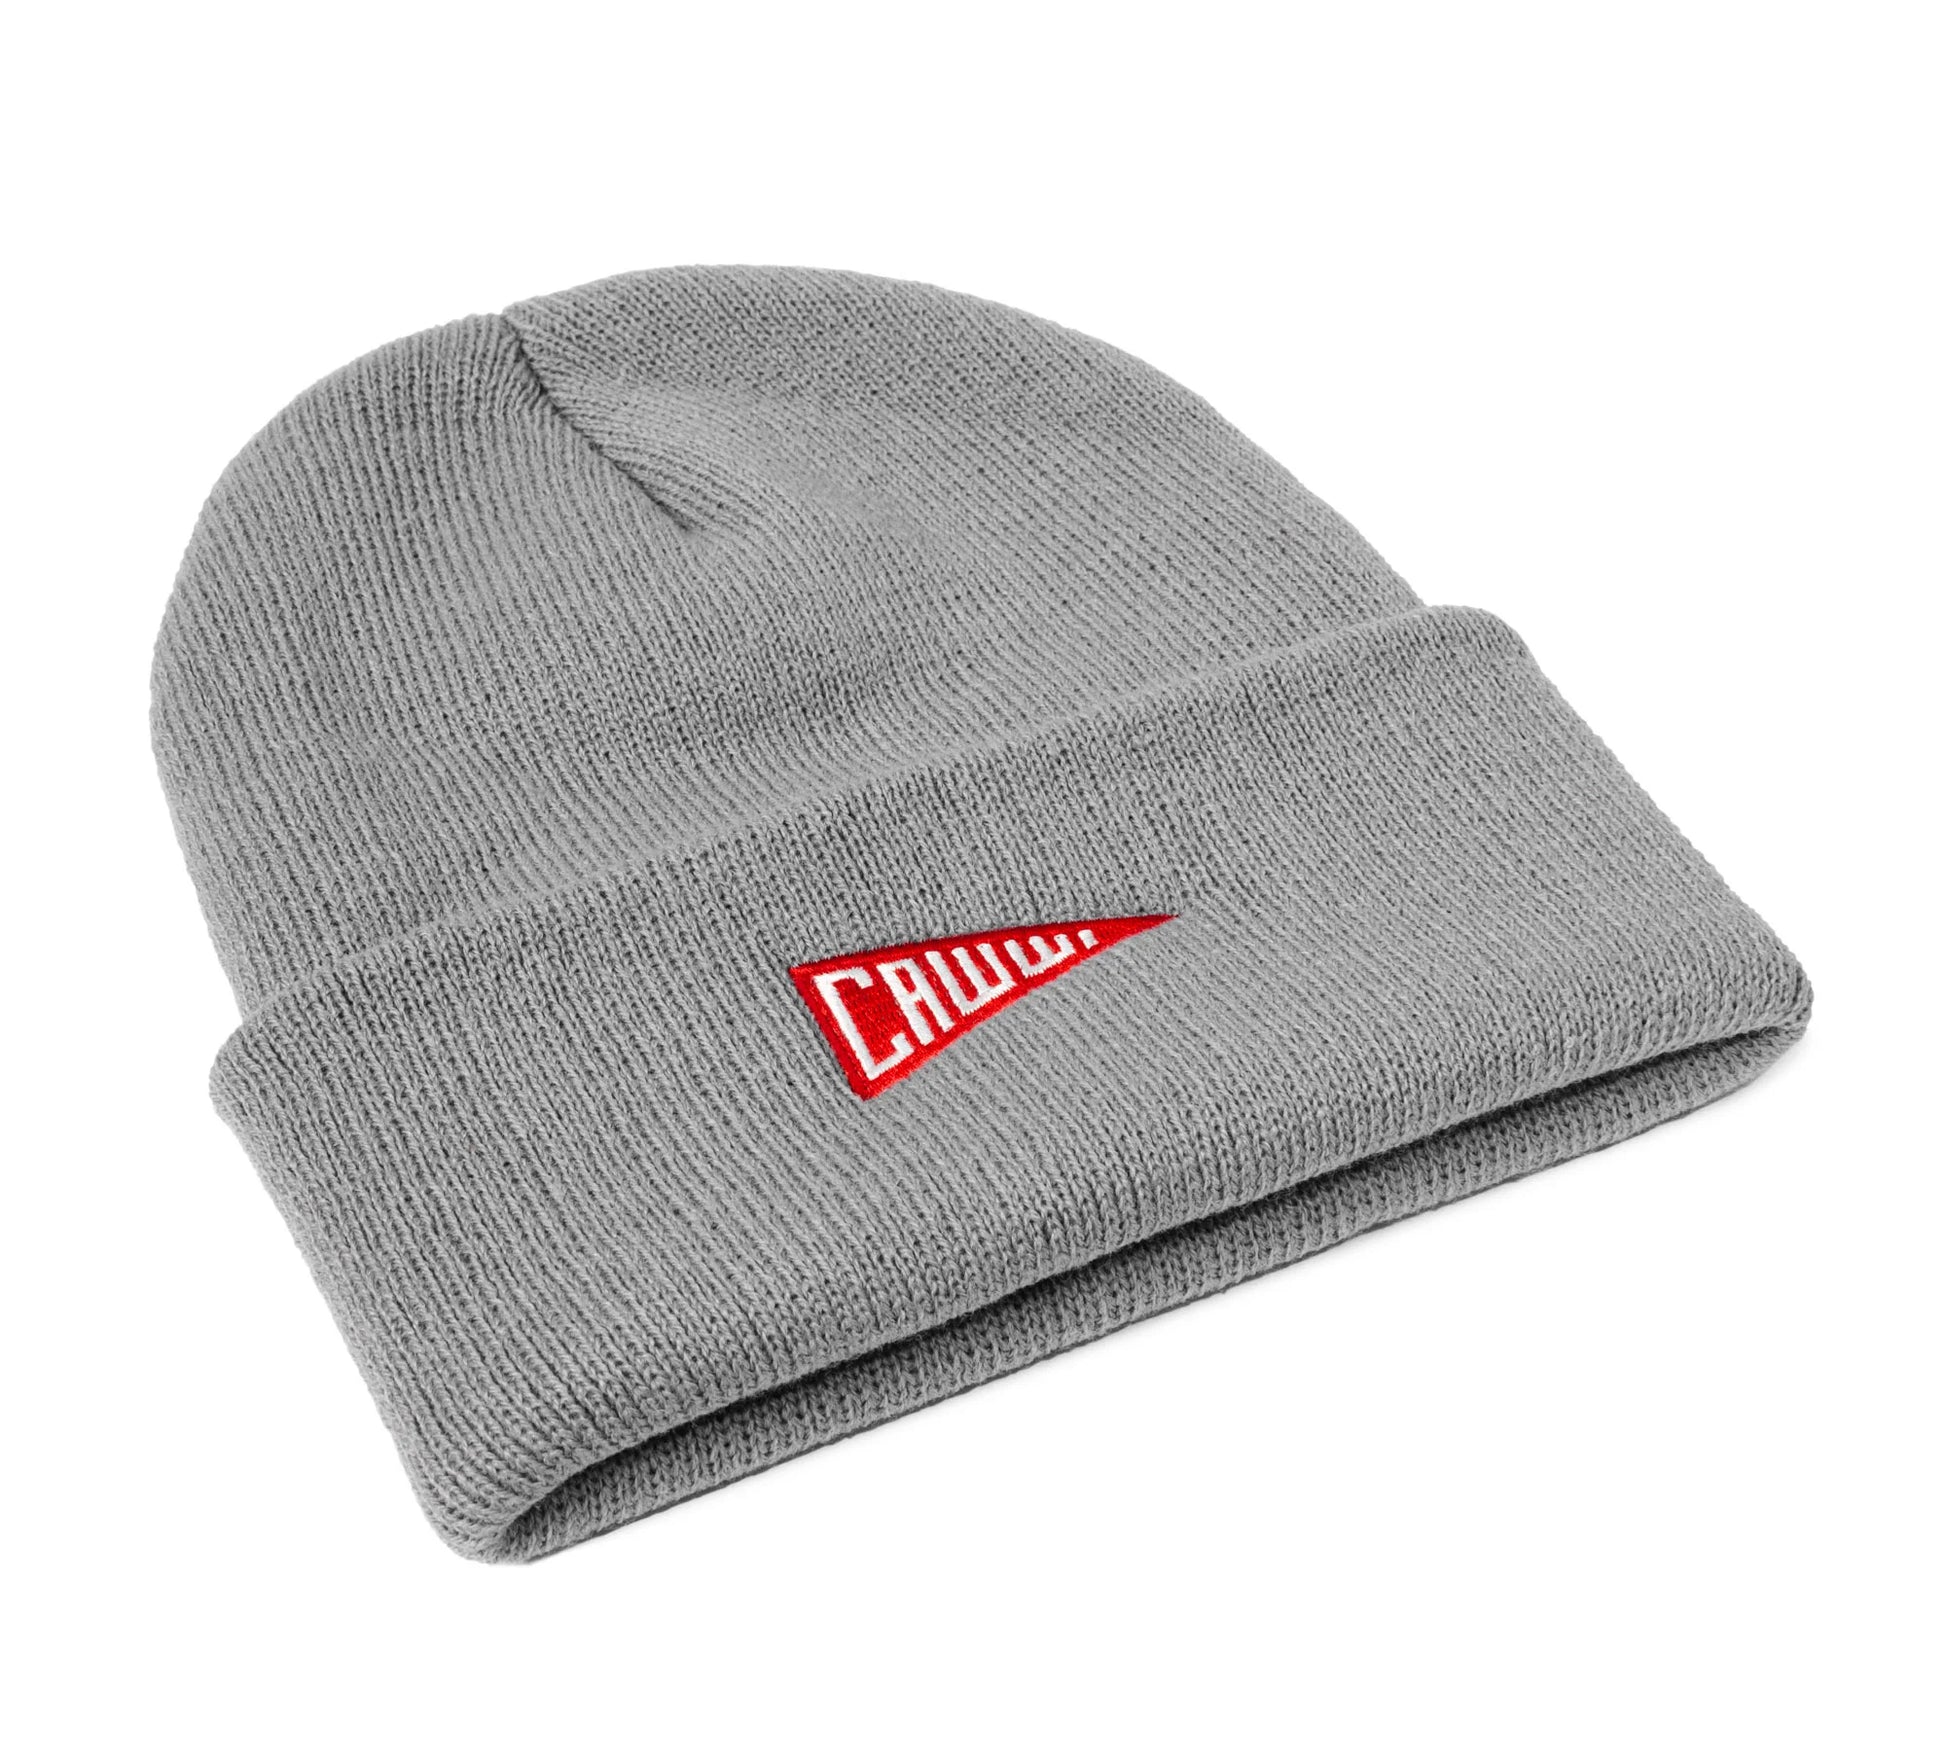 Grey knit beanie with red pennant embroidery laid flat